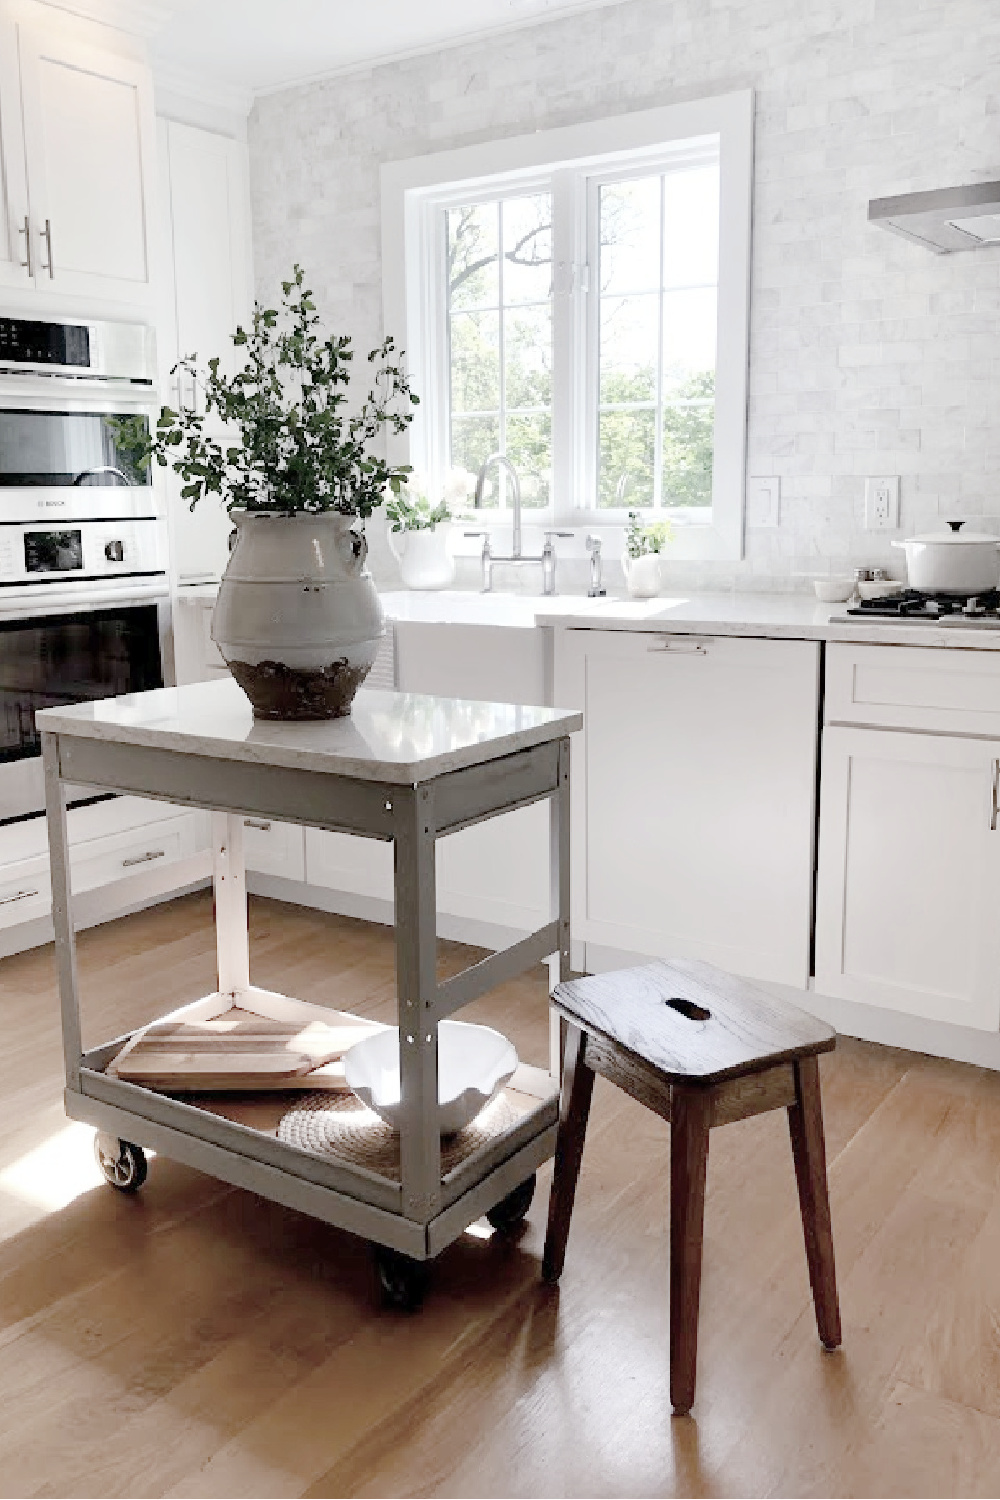 Modern French white kitchen with industrial vintage cart, Viatera Minuet quartz counters, and white oak floors - Hello Lovely Studio.